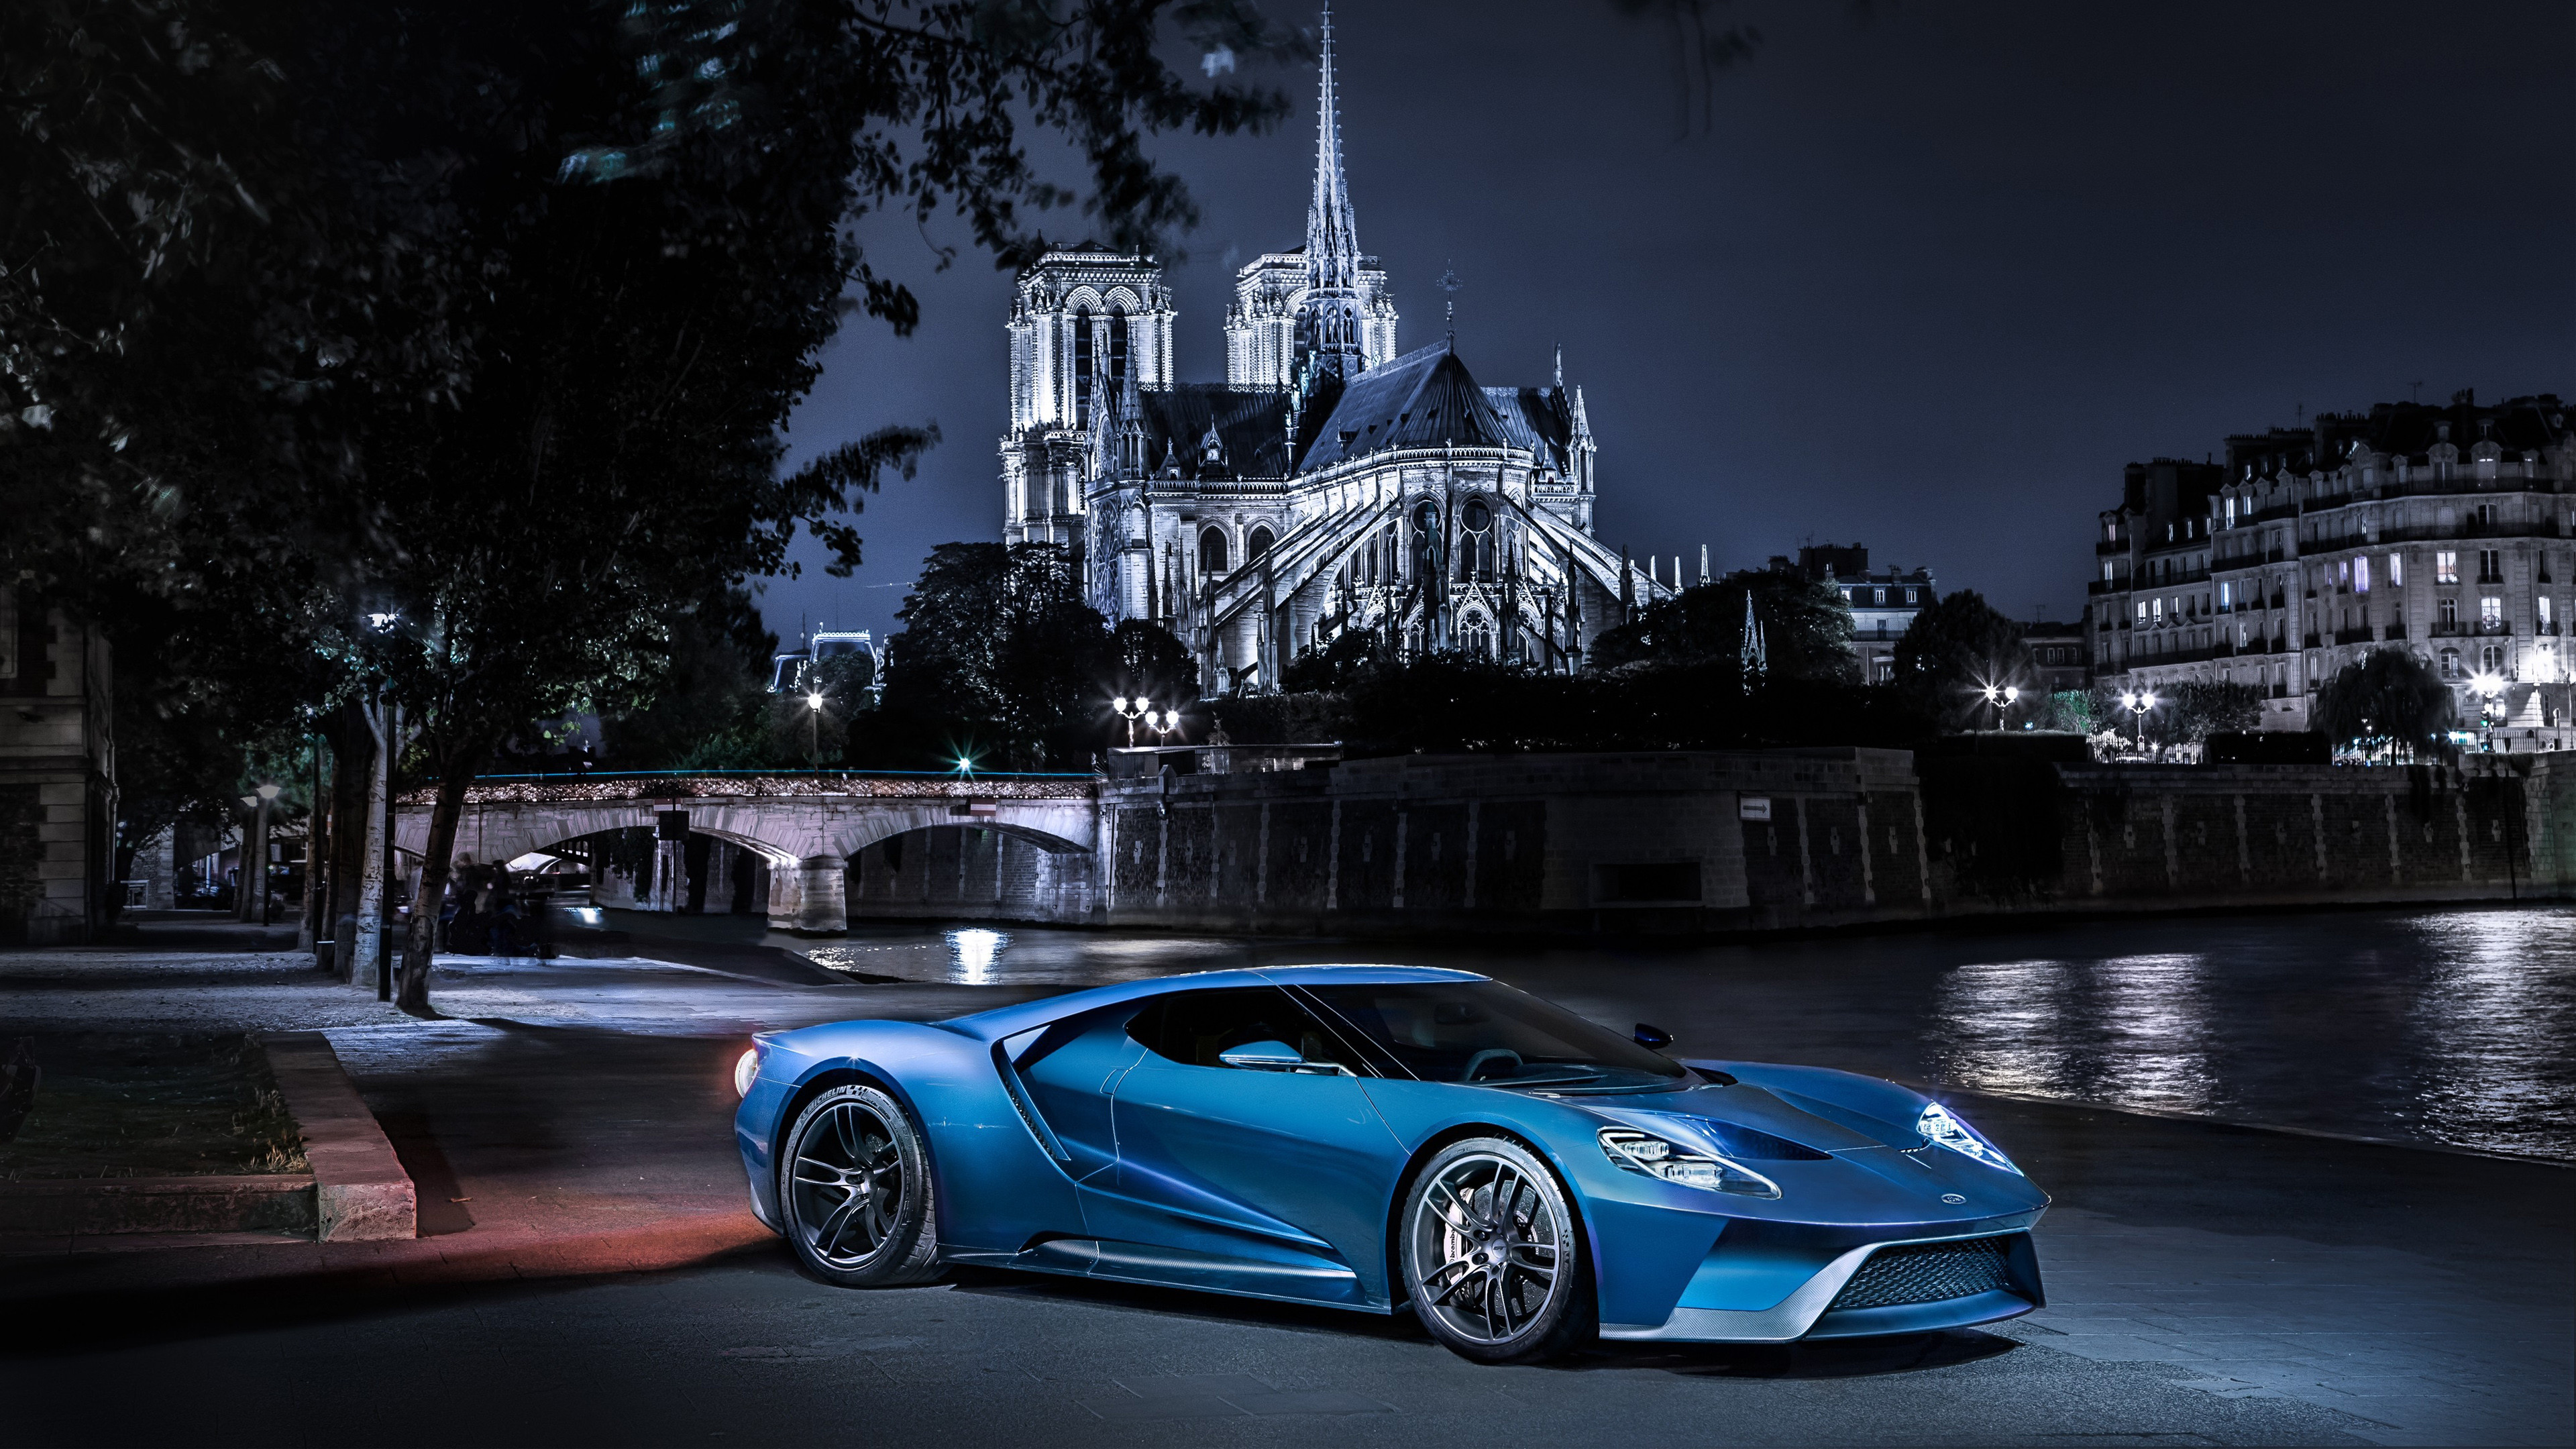 3840x2160 0 Fashion Supercars HD Wallpapers 960x800 Ford GT Supercar Wallpaper HD Car  Wallpapers